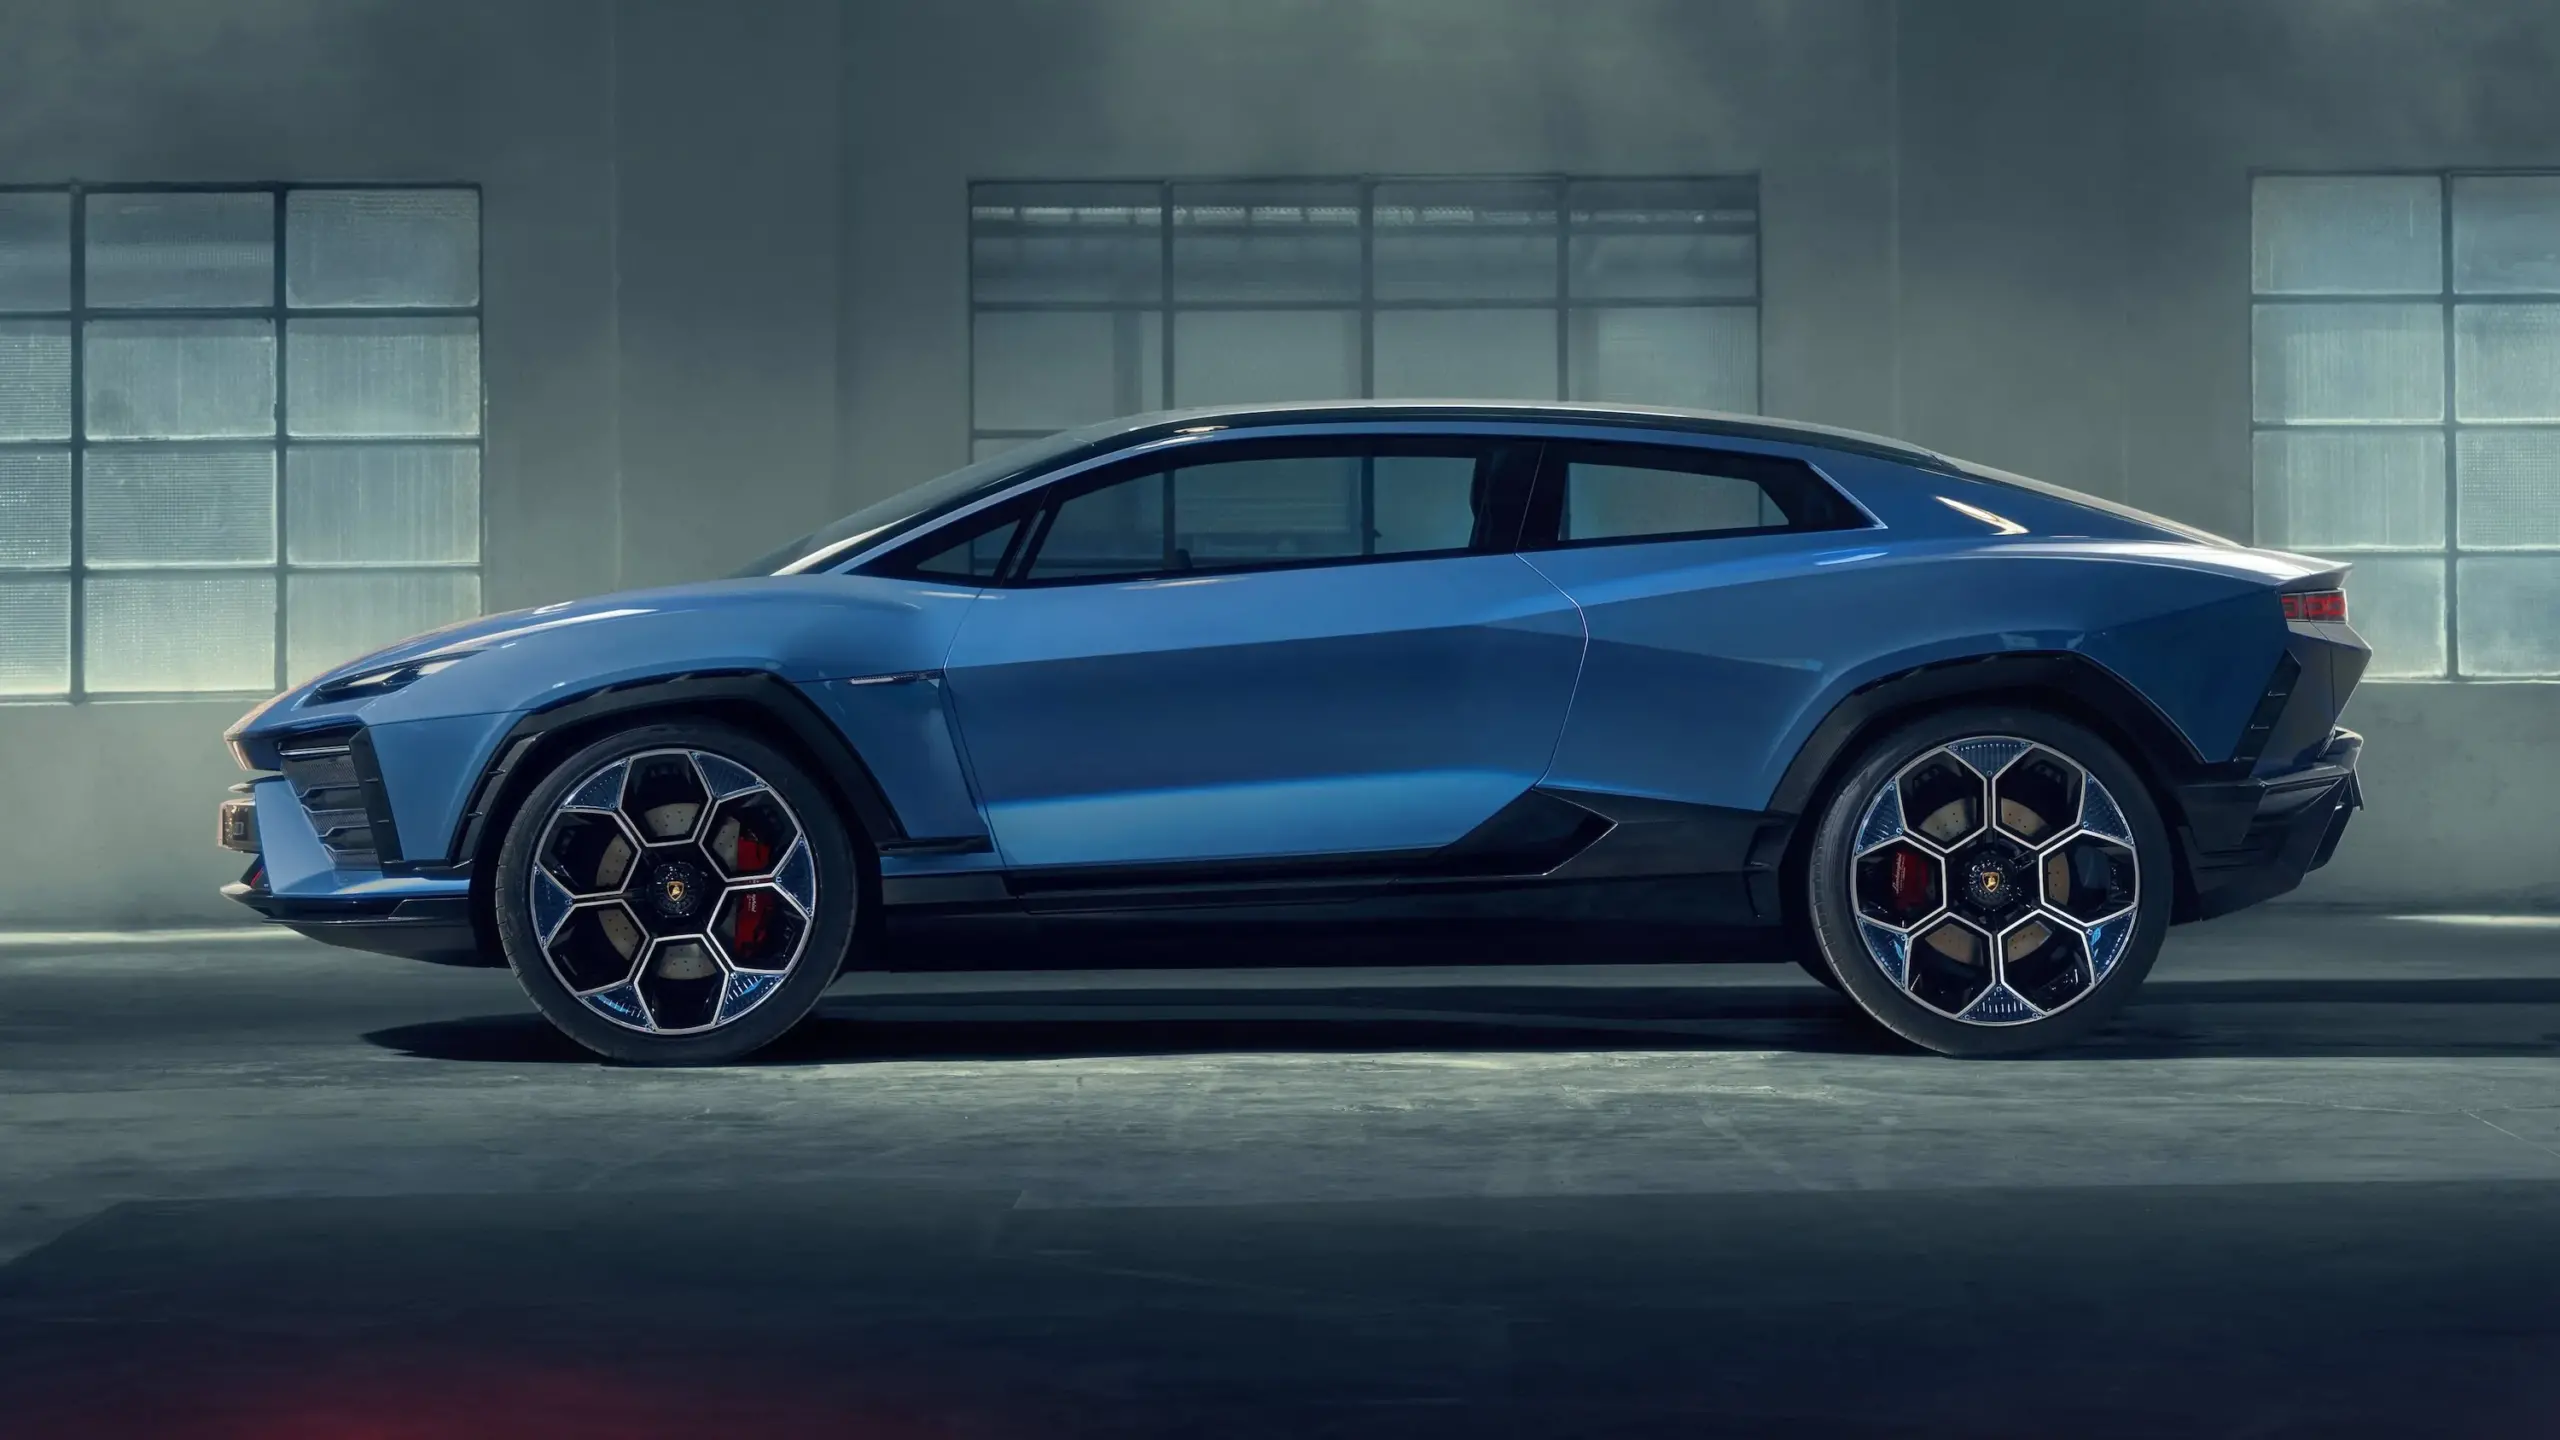 Lamborghini has licensed an organic, fast-charging battery from MIT.